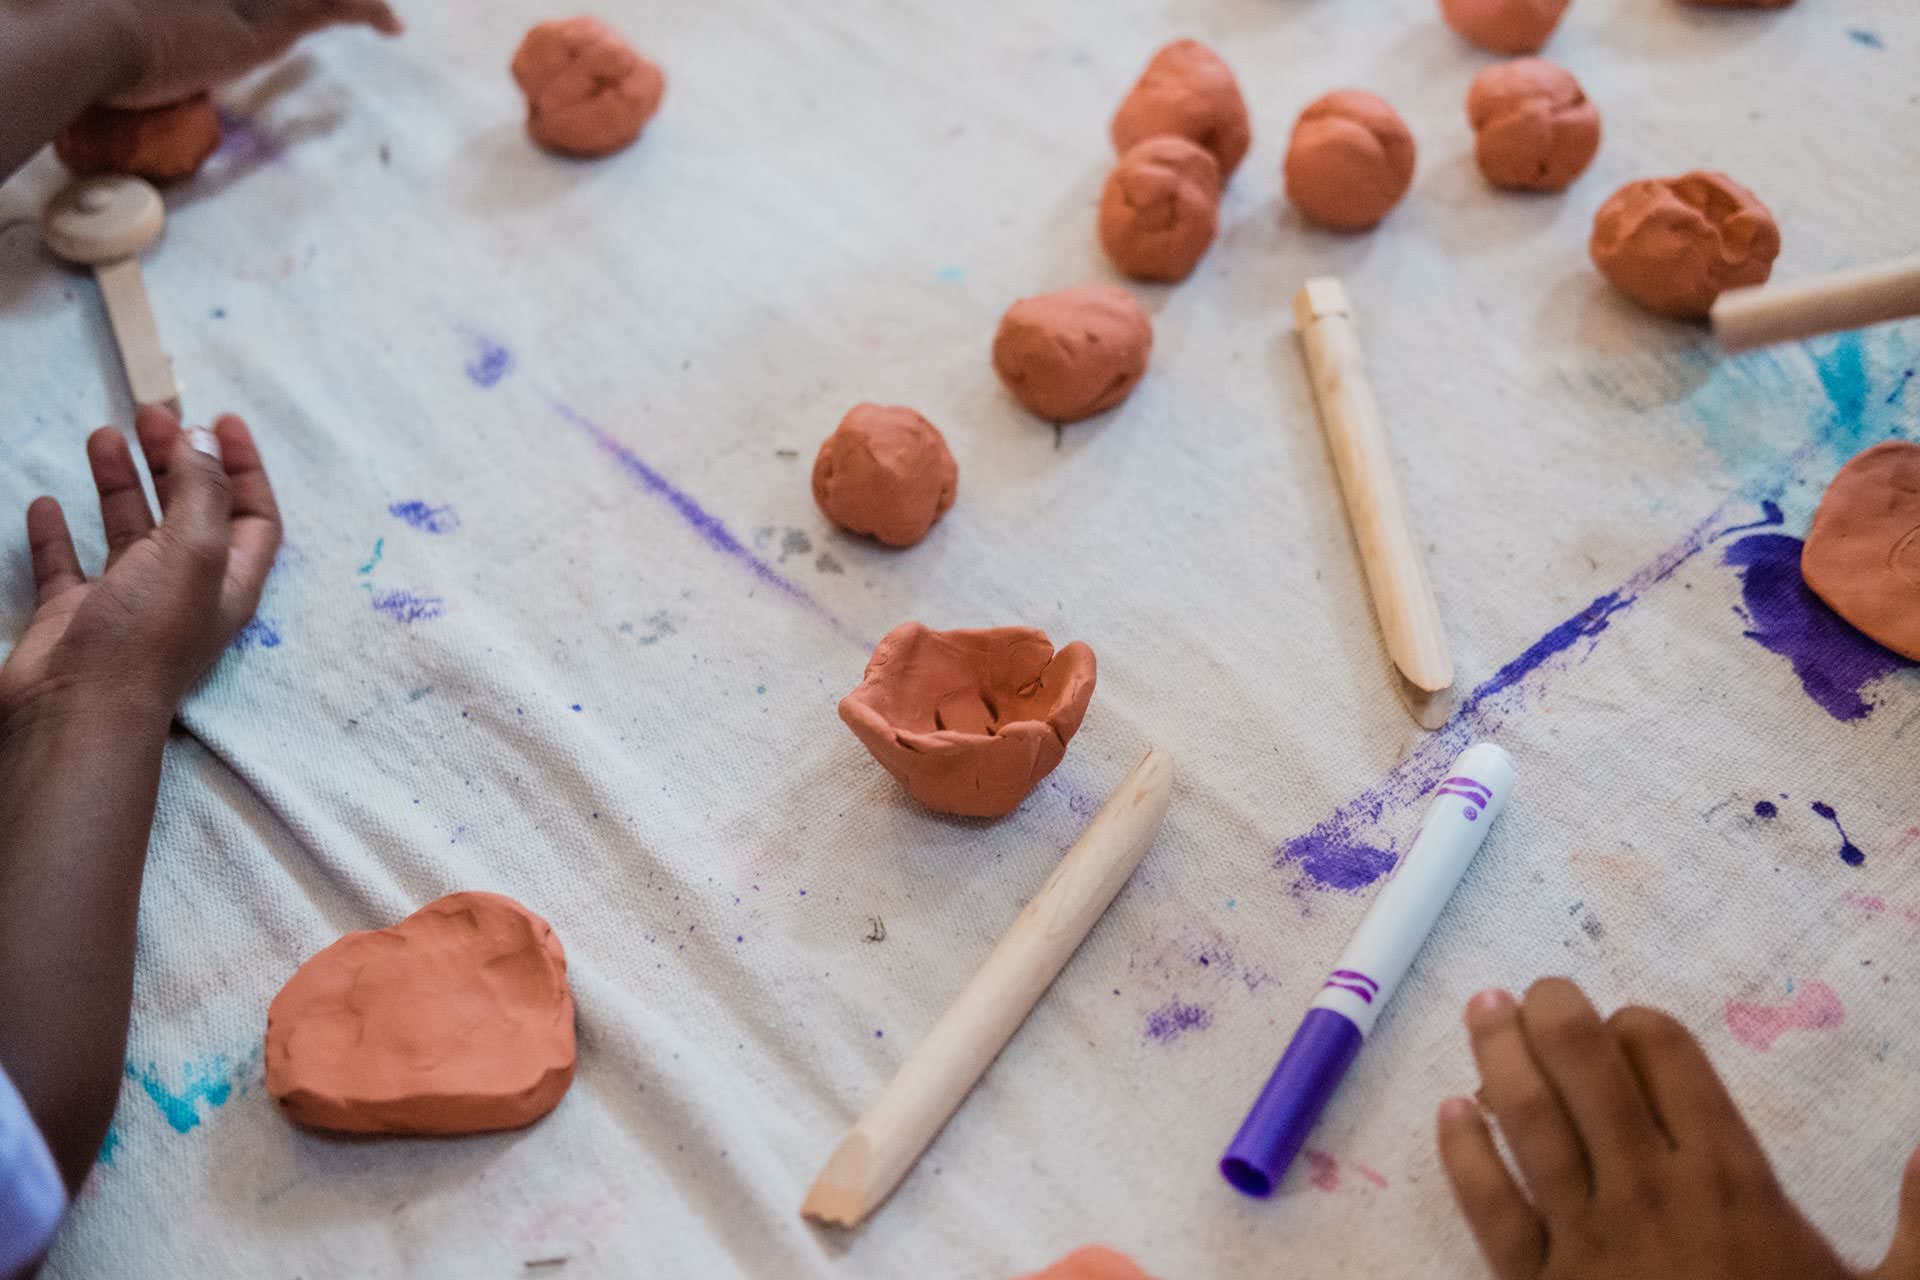 The hands of two young learners at Pittsburgh Faison K-5 school using wooden sticks and markers to shape clay.